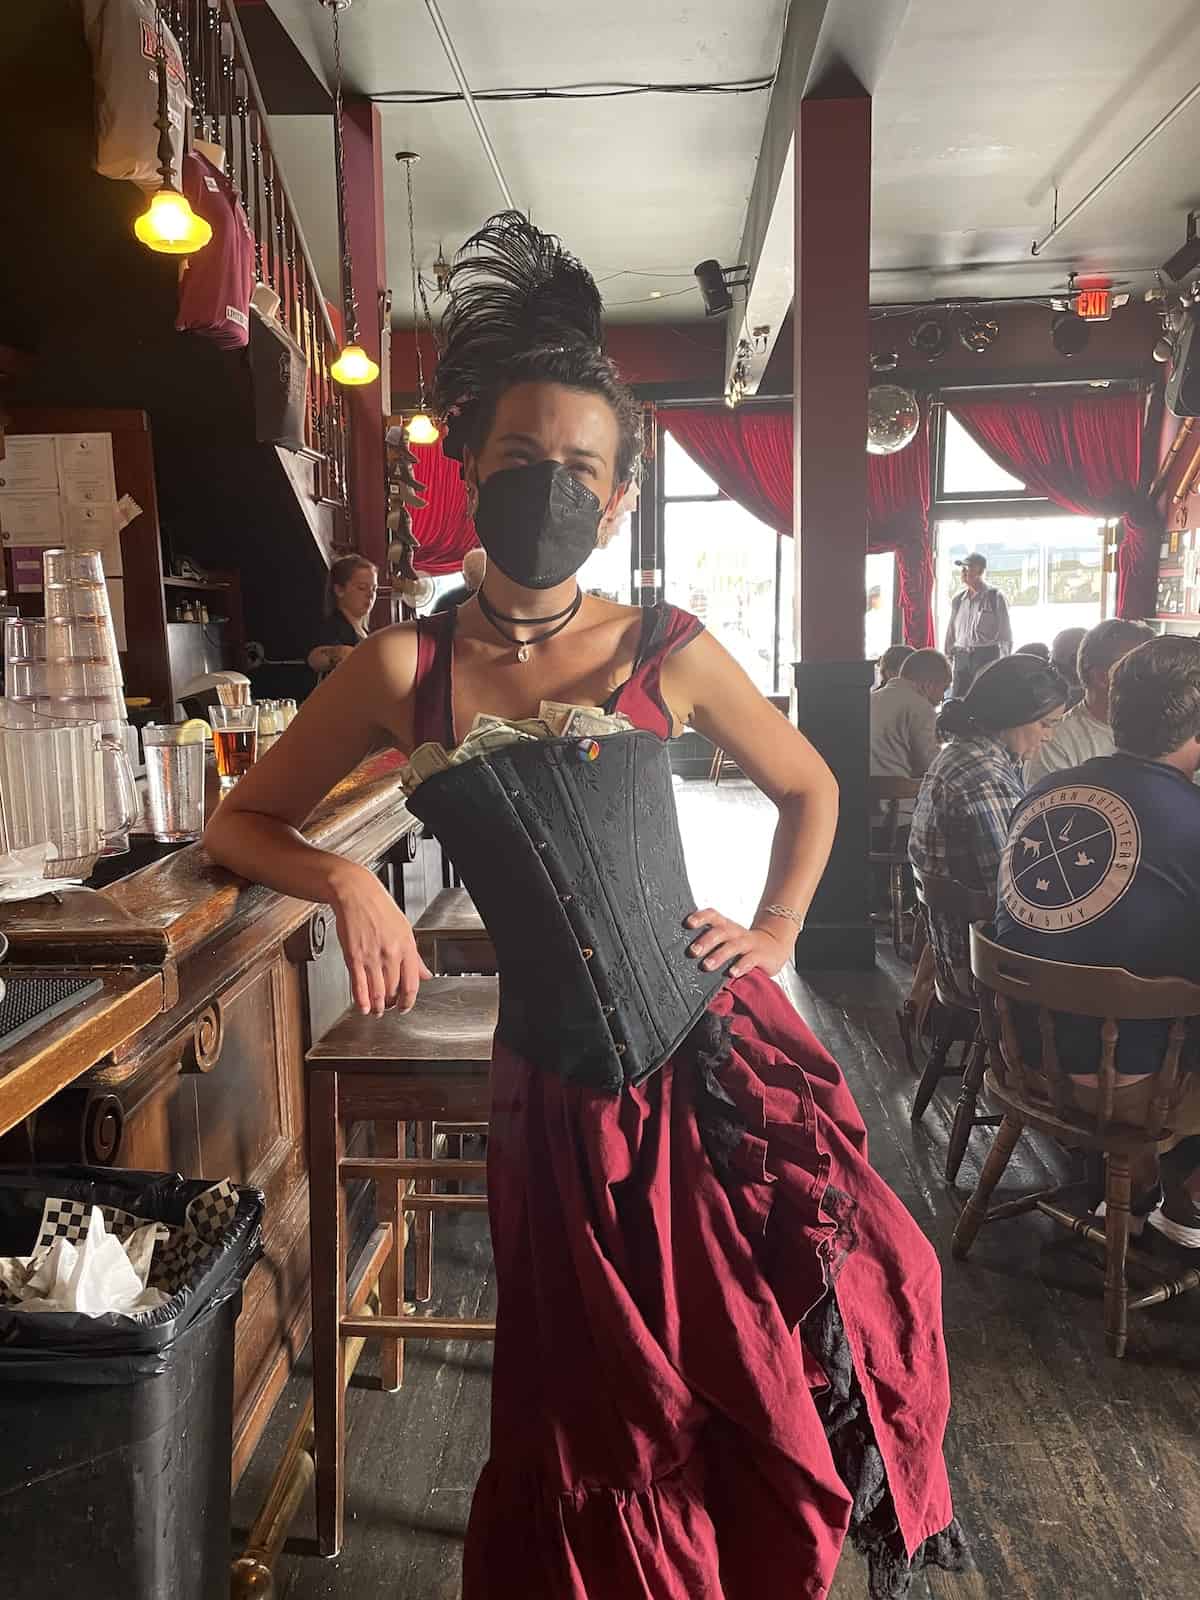 Bartender in old historic clothing.